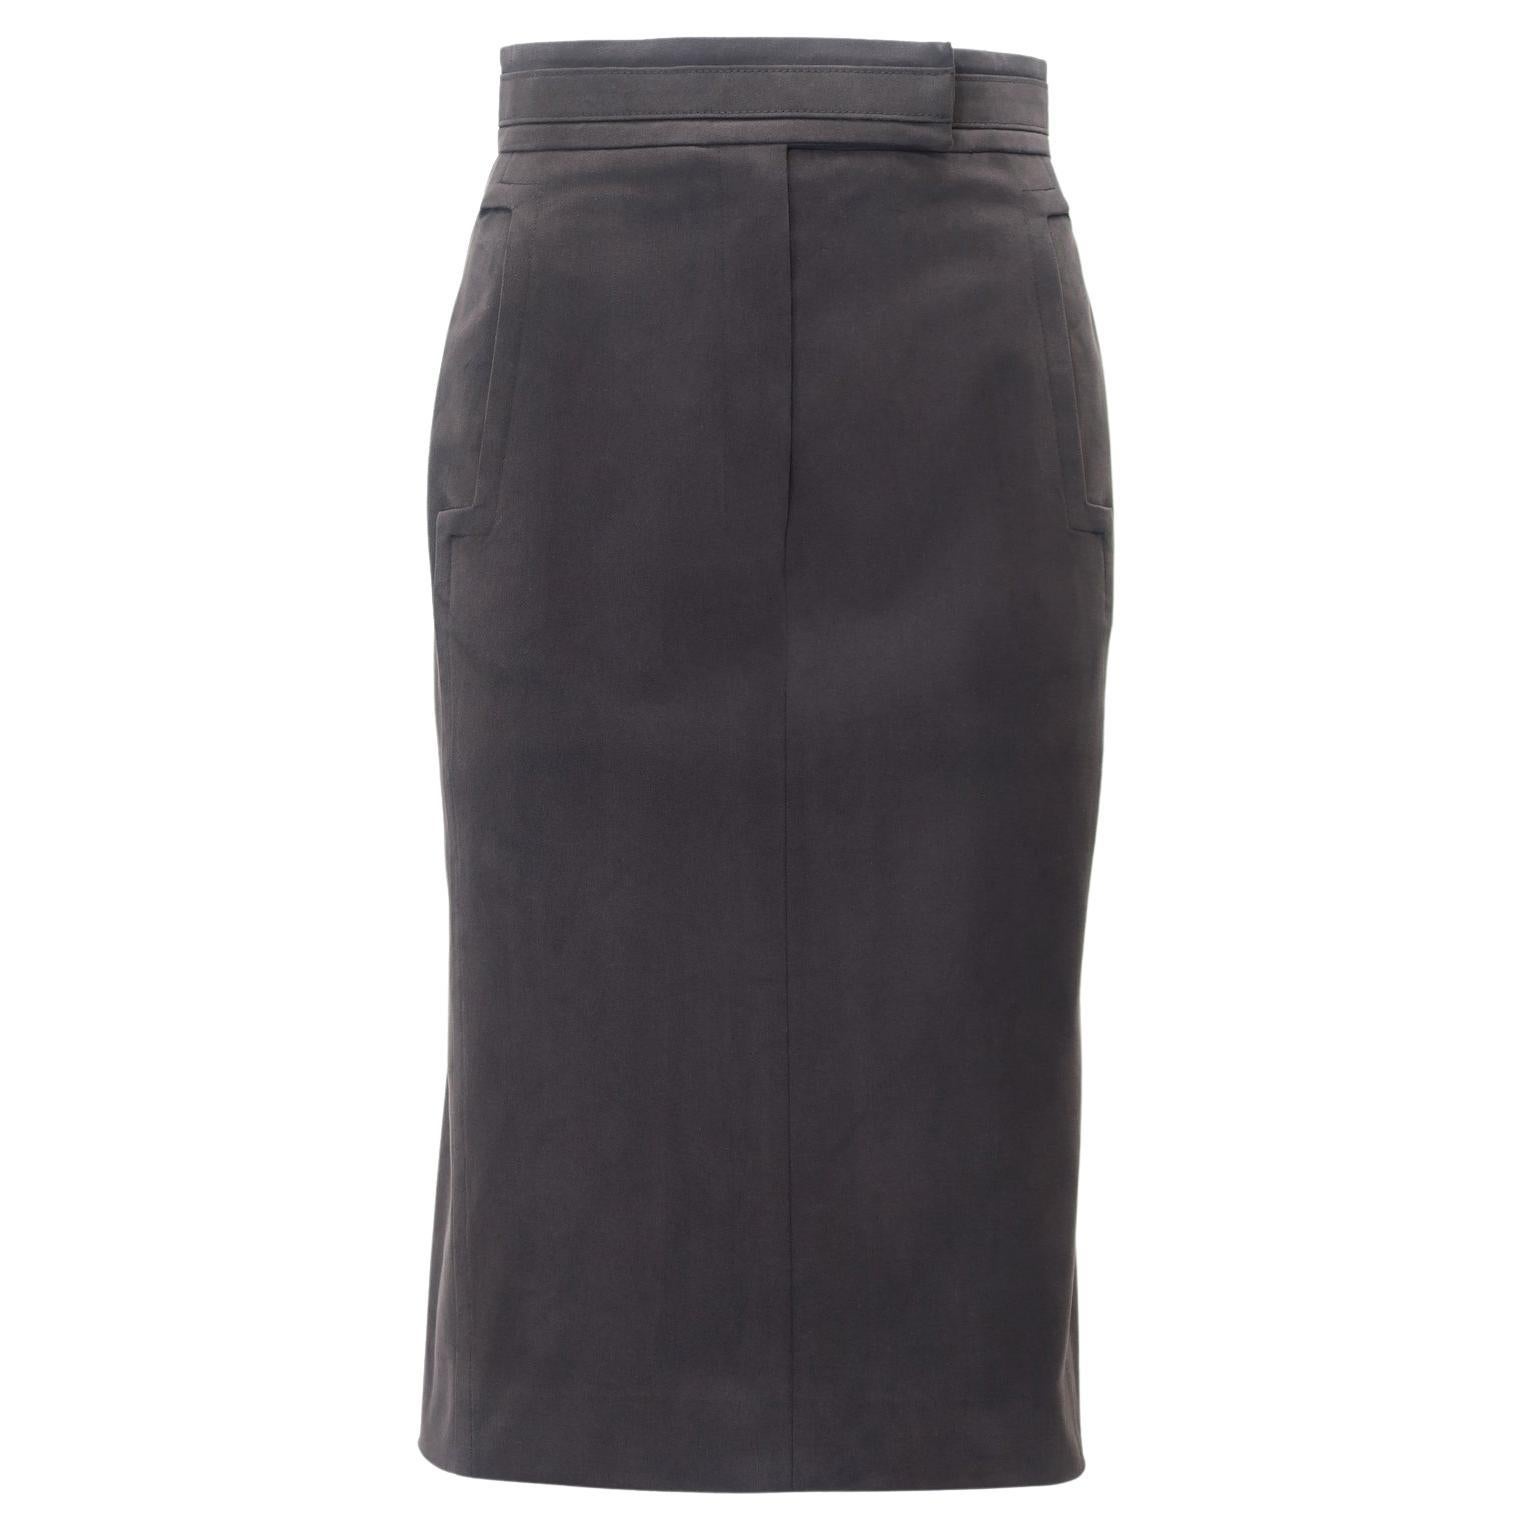 Yves Saint Laurent by Tom Ford FW-2003 Higher Waist Skirt with Belt Detailing For Sale